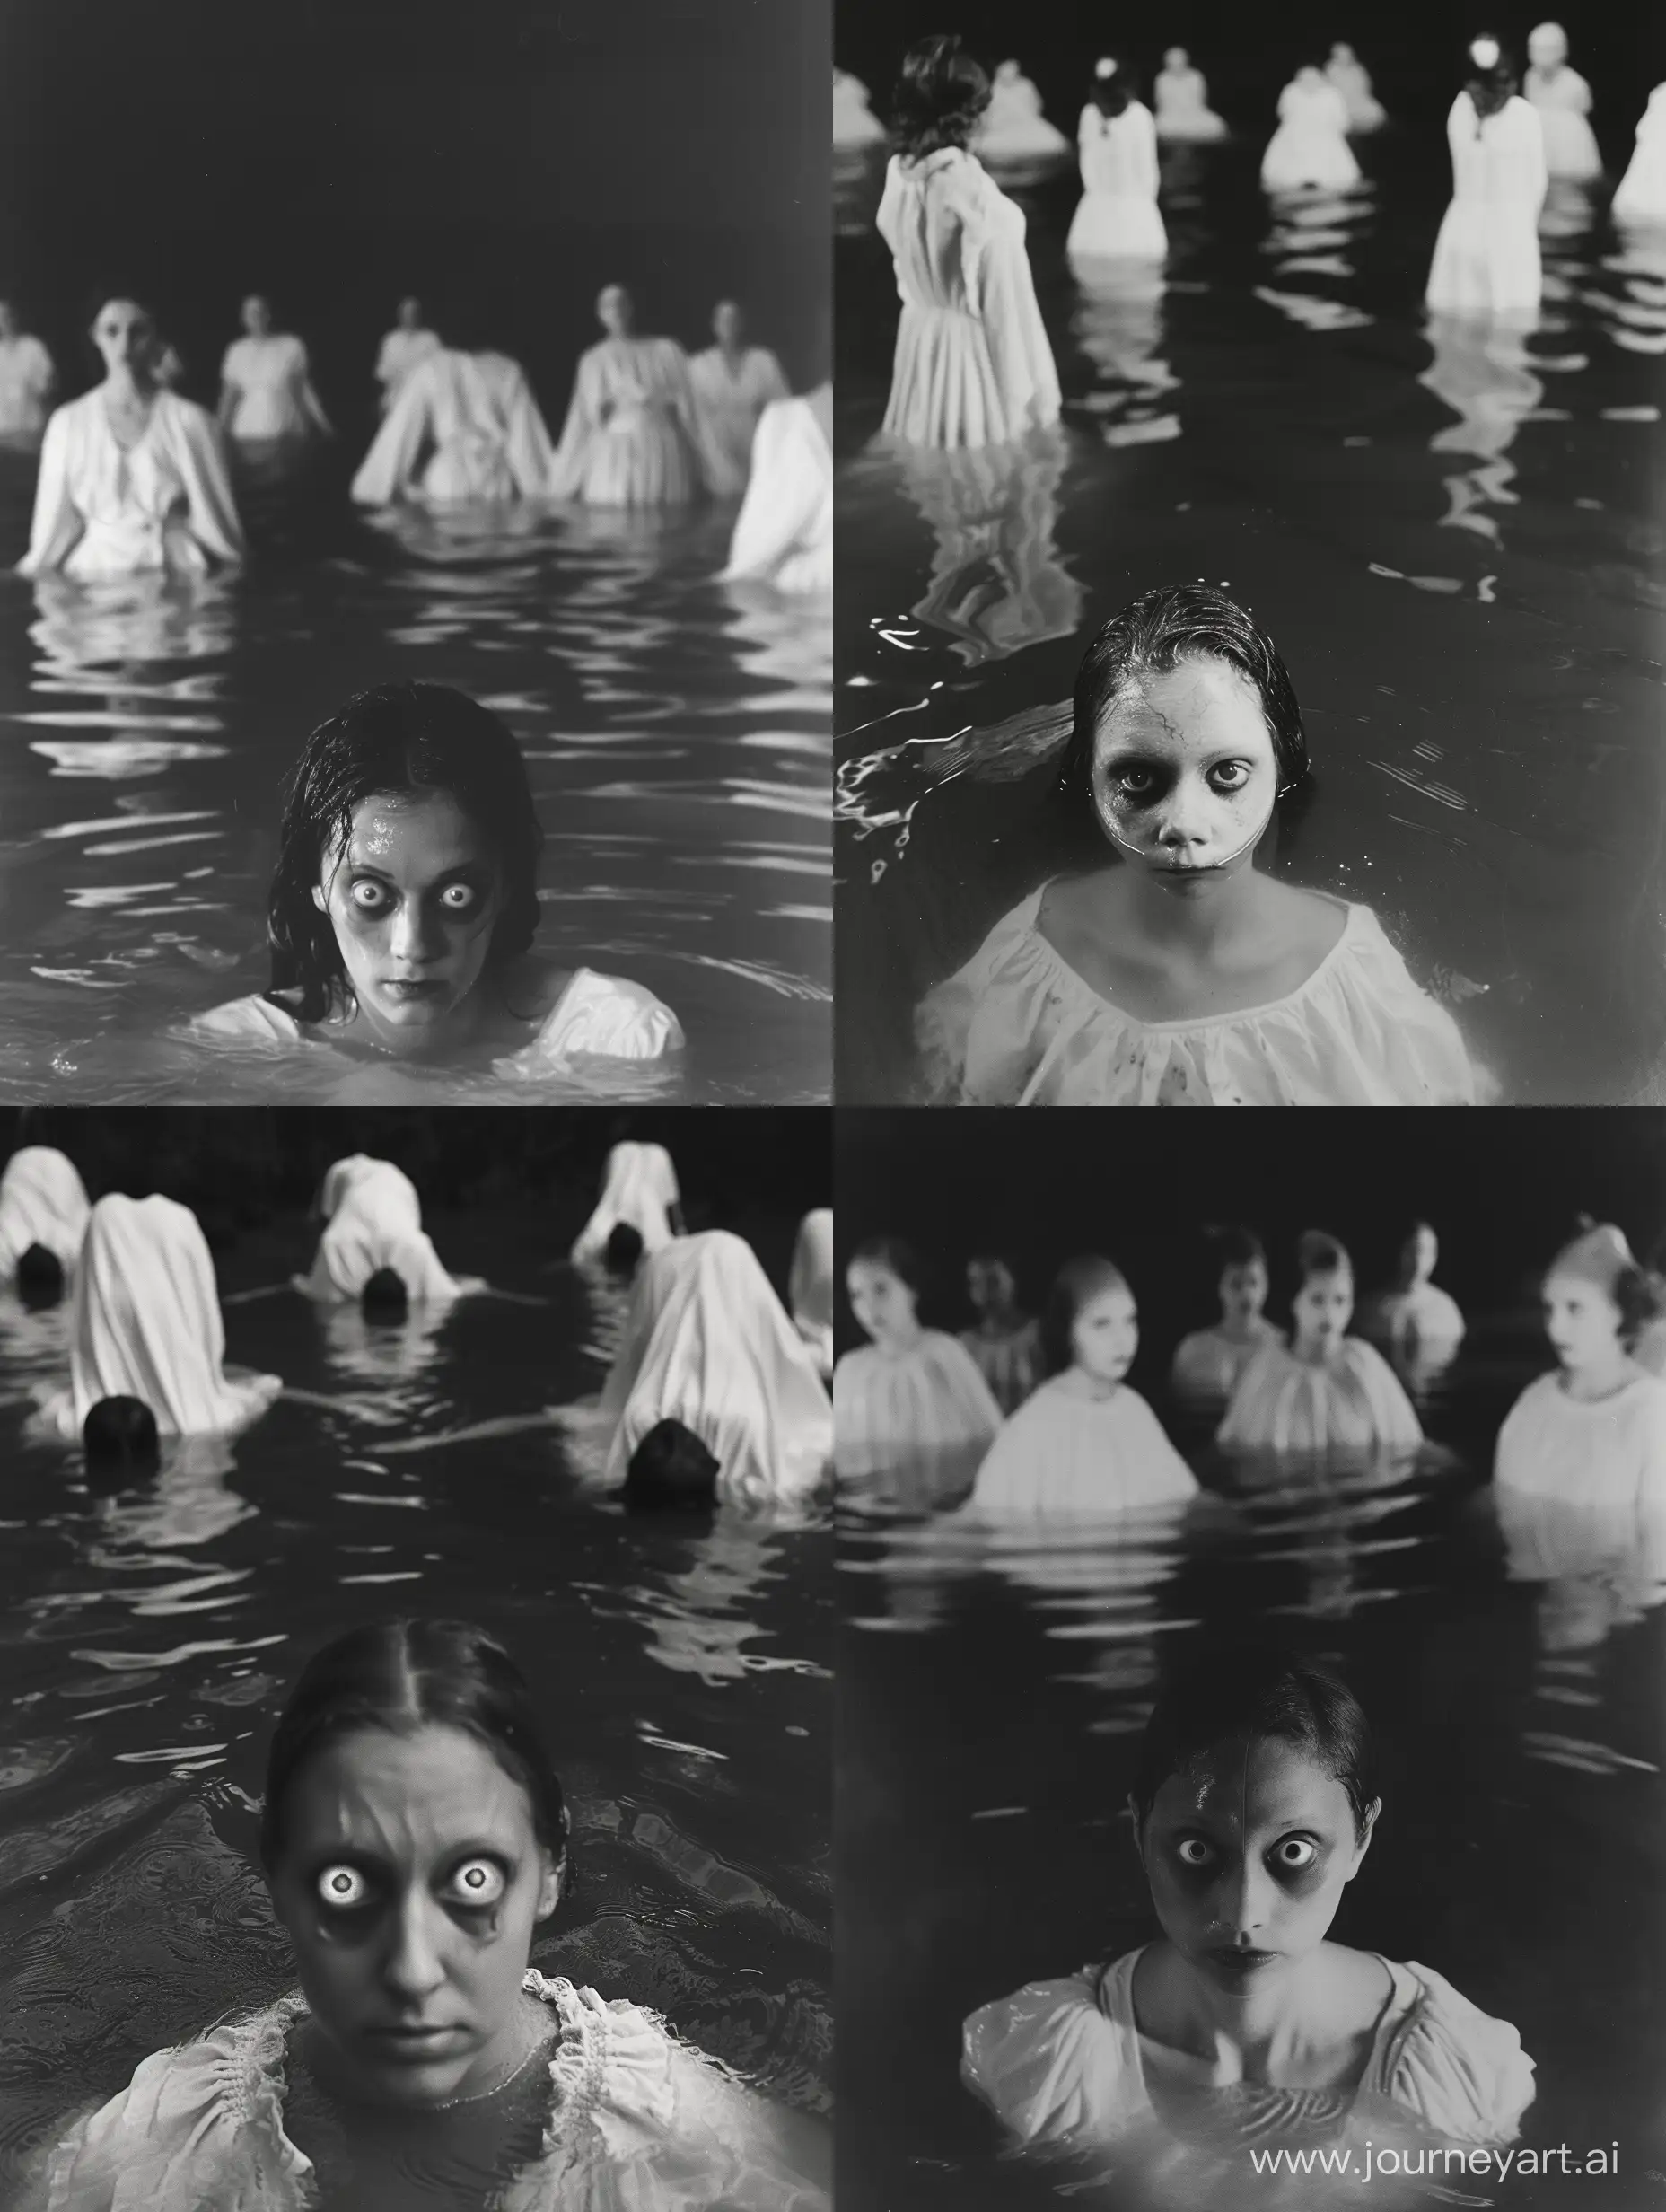 Eerie-Grayscale-Portrayal-of-Submerged-Souls-in-Murky-Waters